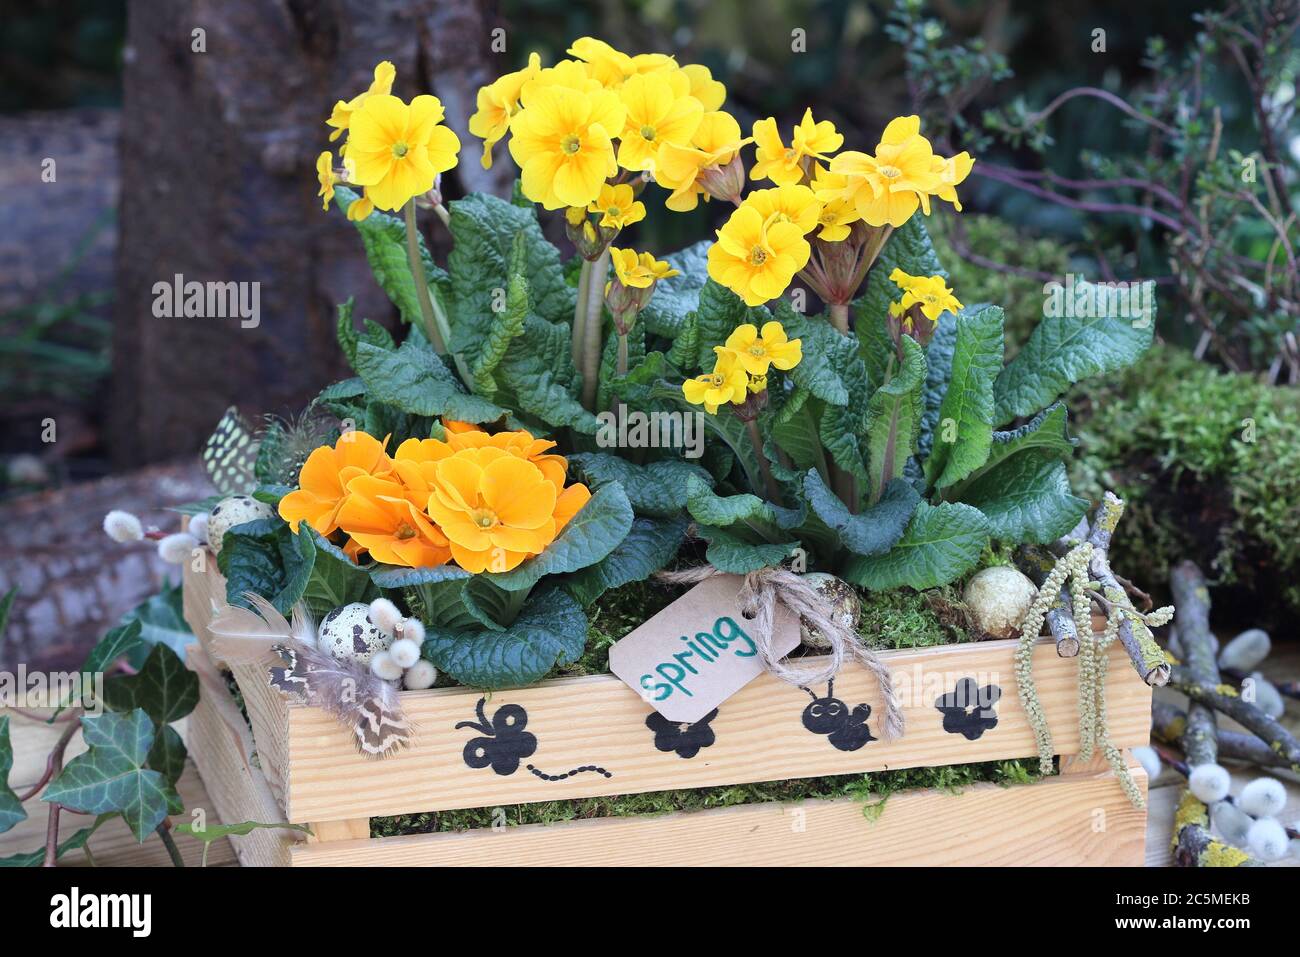 yellow primroses in wooden box as rustic spring decoration Stock Photo